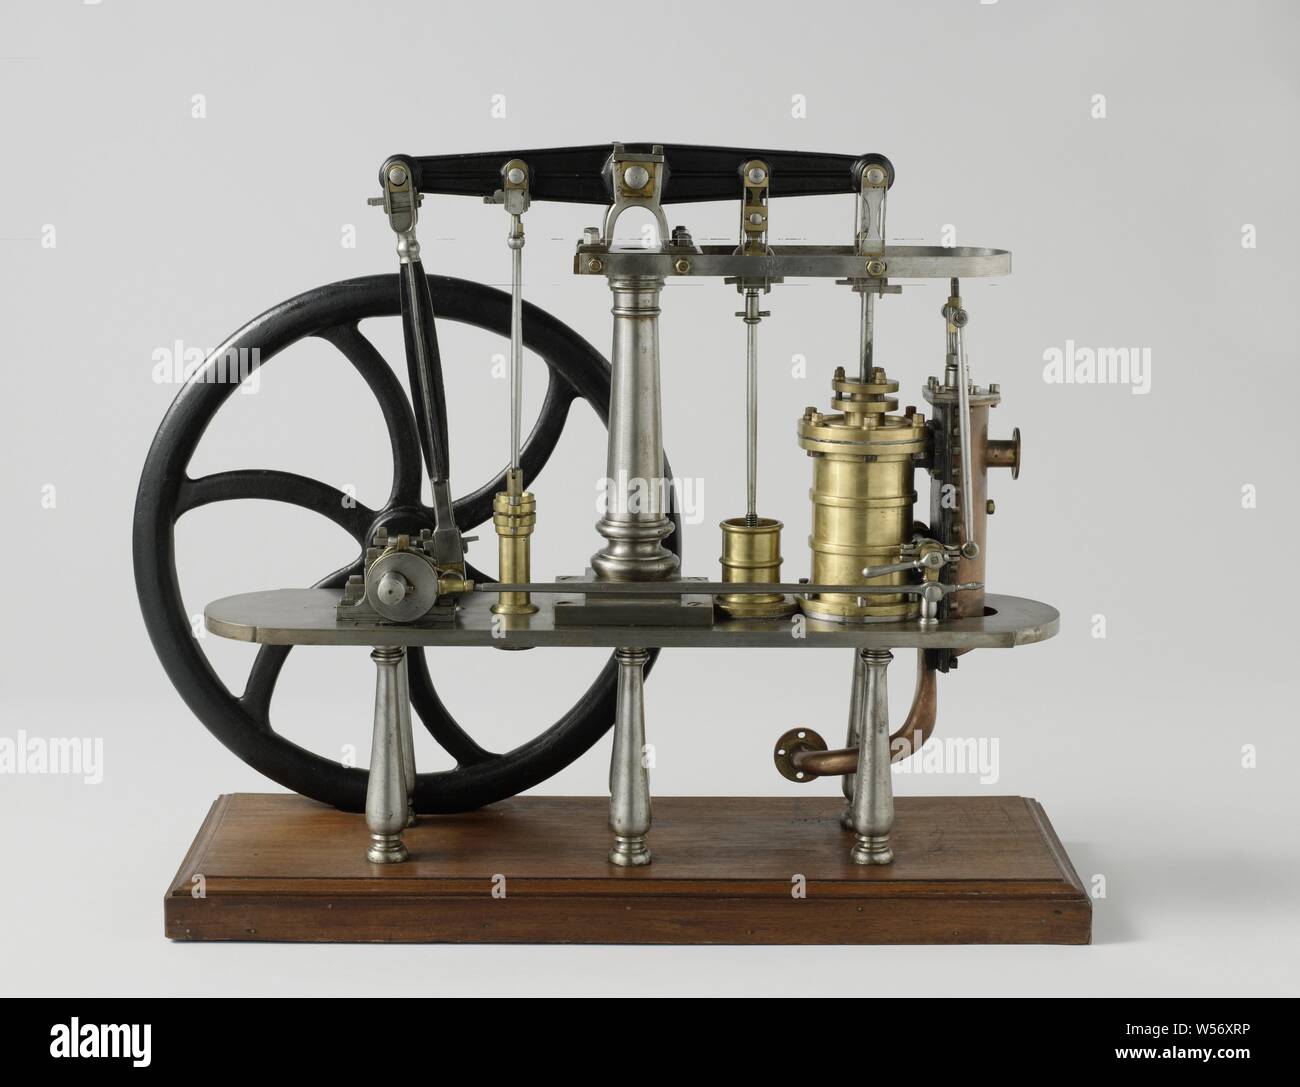 Model of a Double-Acting Beam Engine, Model of a double-acting land-based steam engine, on a wooden ground board. The model has a balance and flywheel, but no condenser. The piston drives the balance, which in turn drives the air pump, the cold water pump of the condenser and the crankshaft. The flywheel is mounted on the crankshaft and on the other side an eccentric with a long drive rod, which drives the steam slide on the other side of the machine. The steam valve has two inputs on the cylinder. The air pump seal is missing. Scale 1:20 (derived)., H.W. Fricke (mentioned on object), 1840 Stock Photo